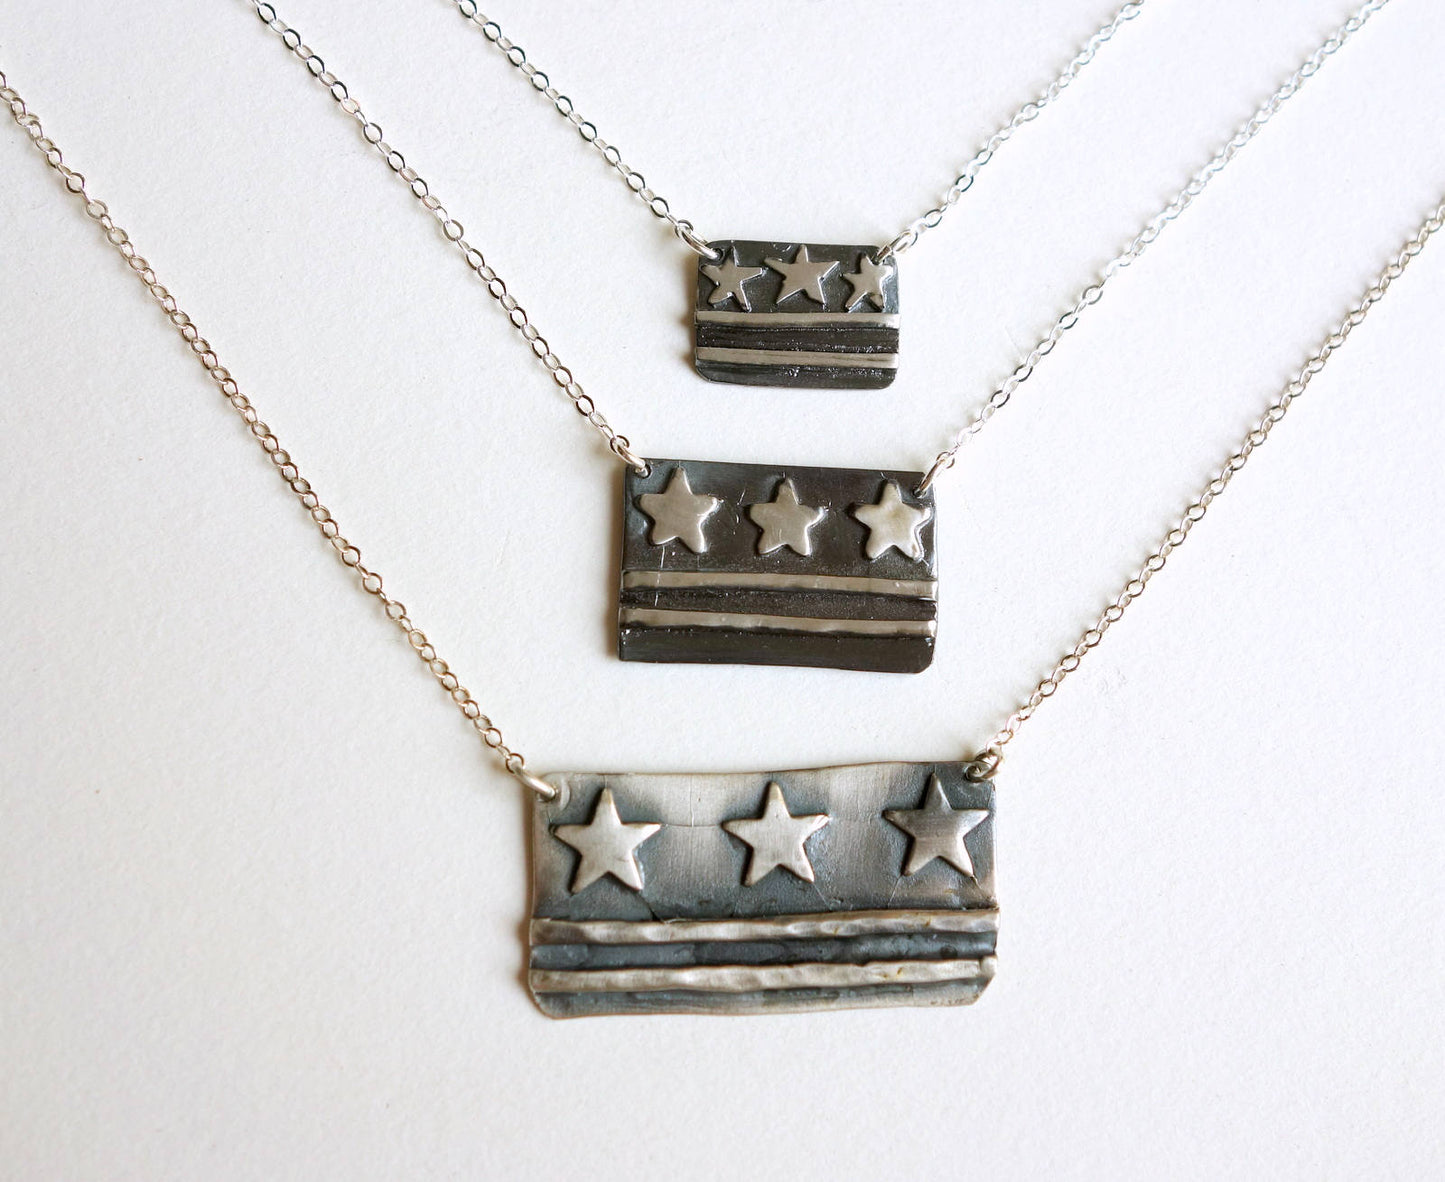 Sterling Silver DC Flag Necklaces - Small, Medium, Large sizes - DC Pride, Made in DC, District of Columbia Flag